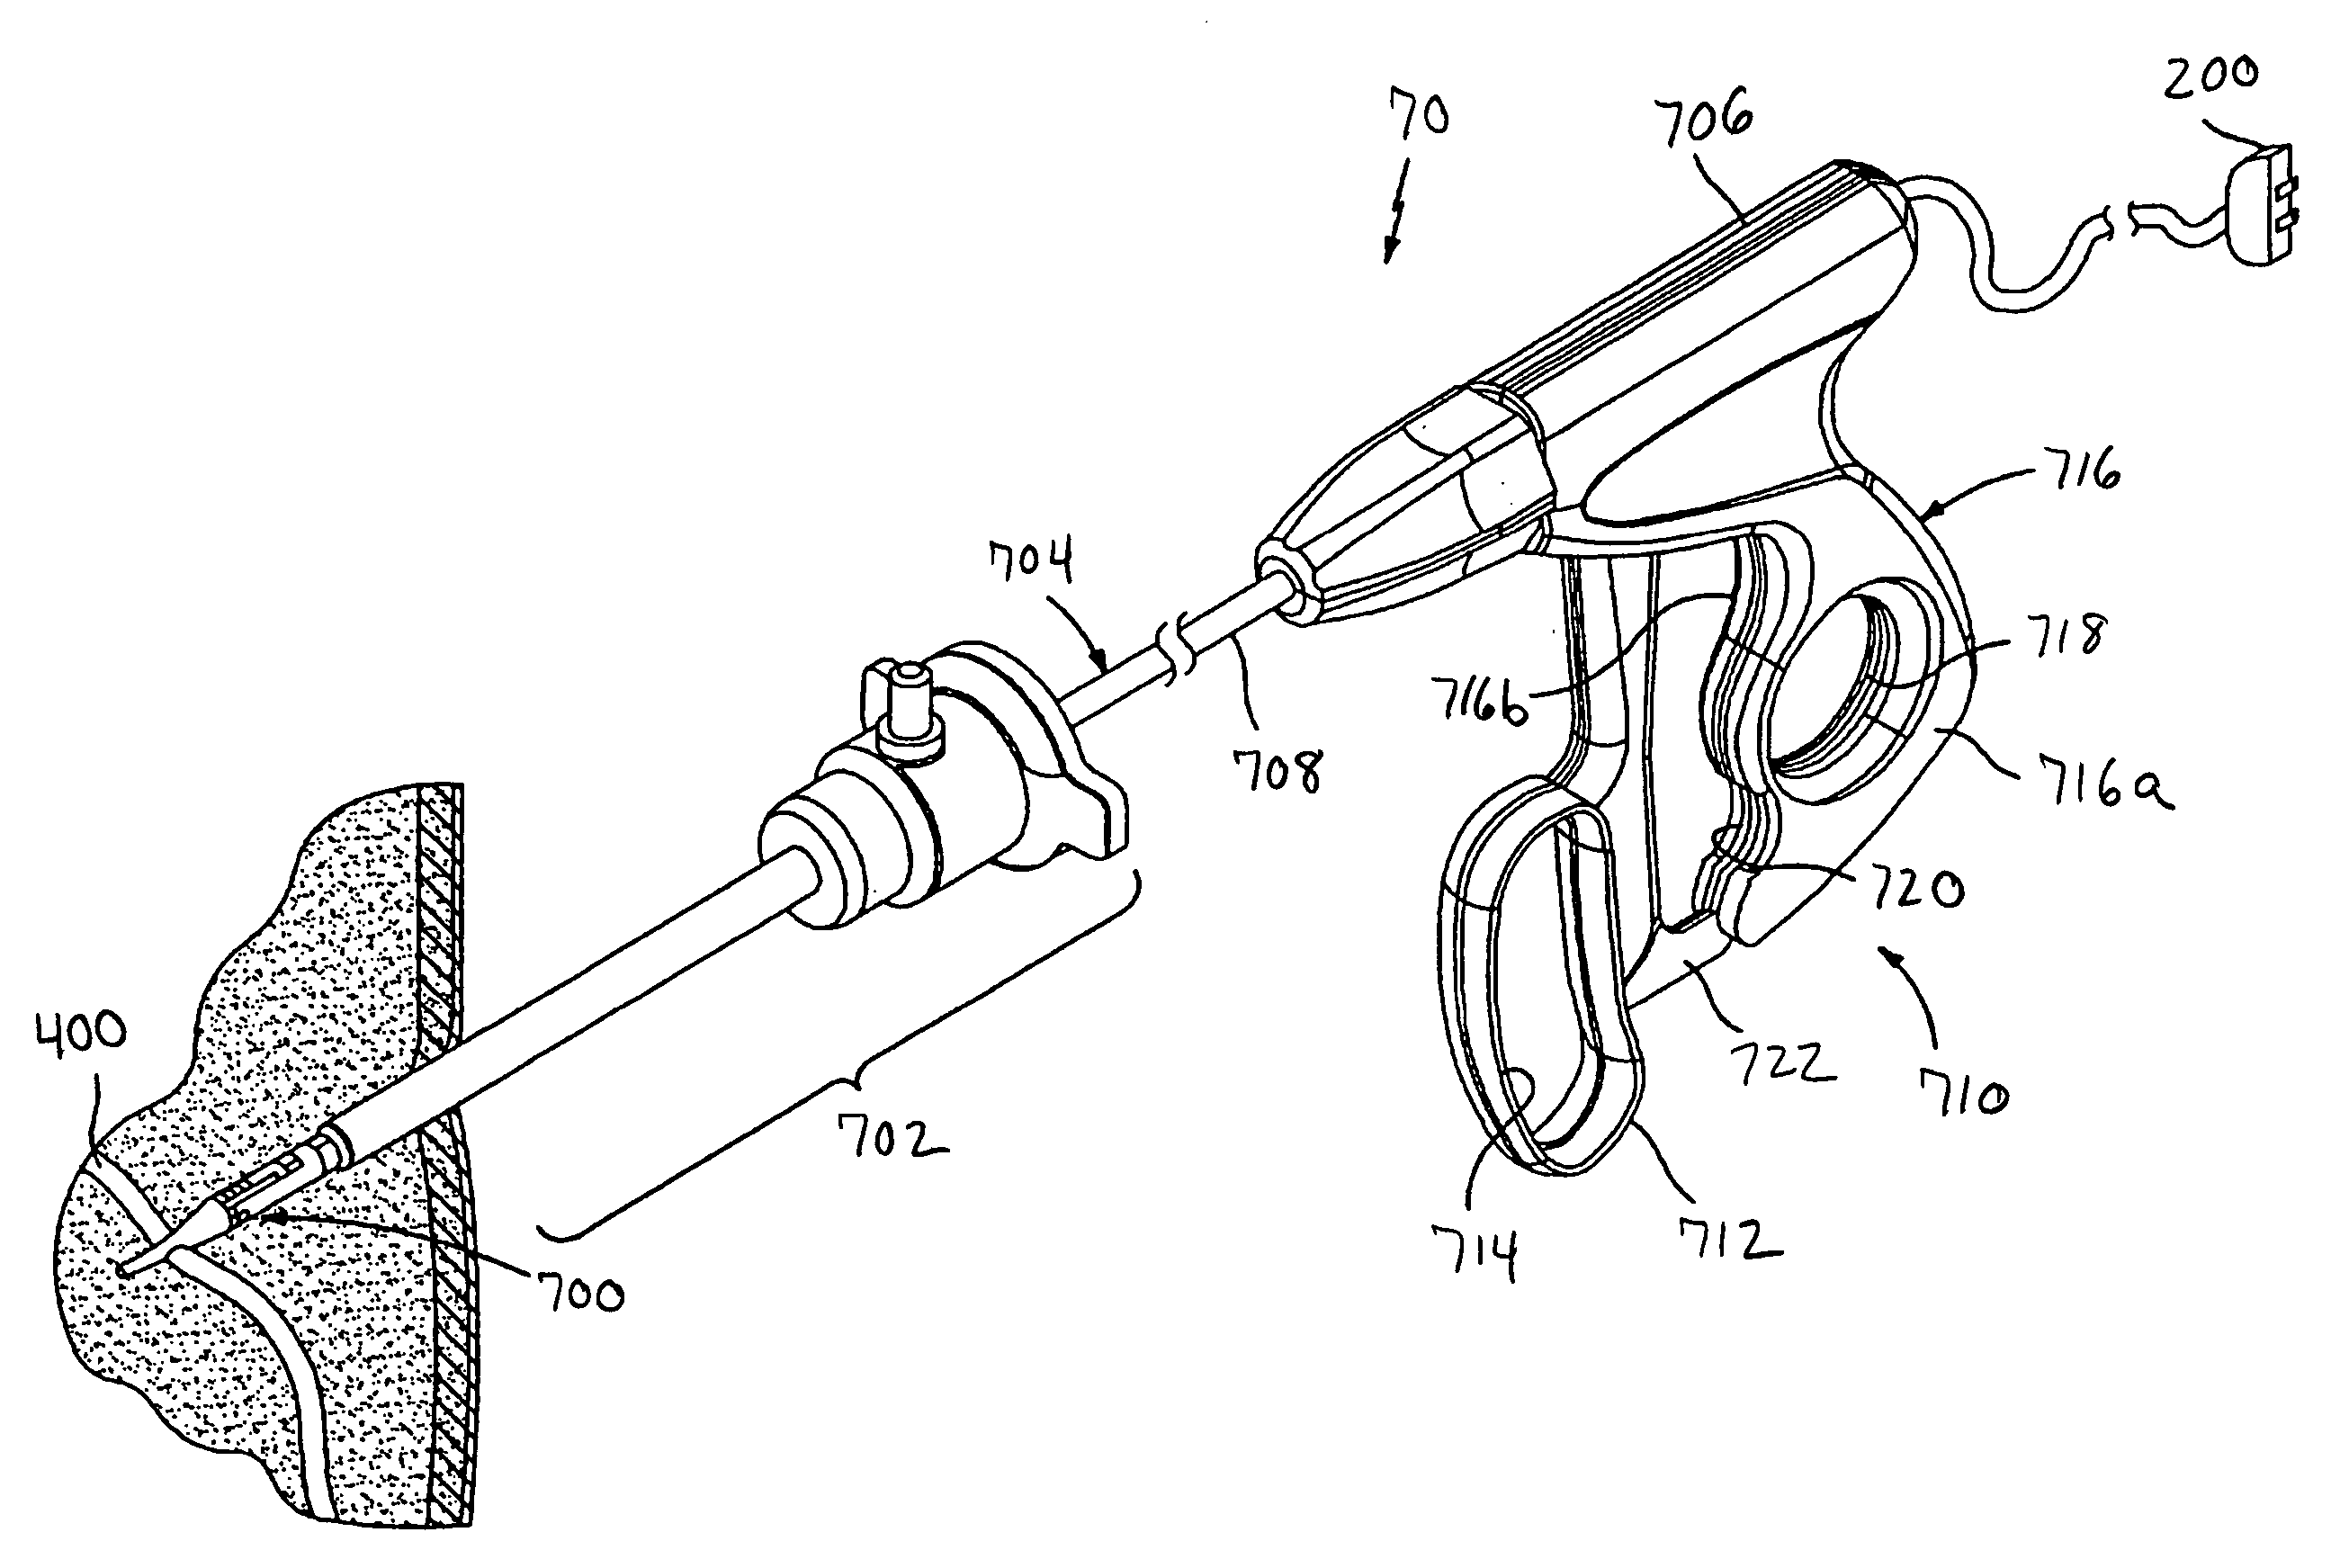 Vessel sealing system using capacitive RF dielectric heating